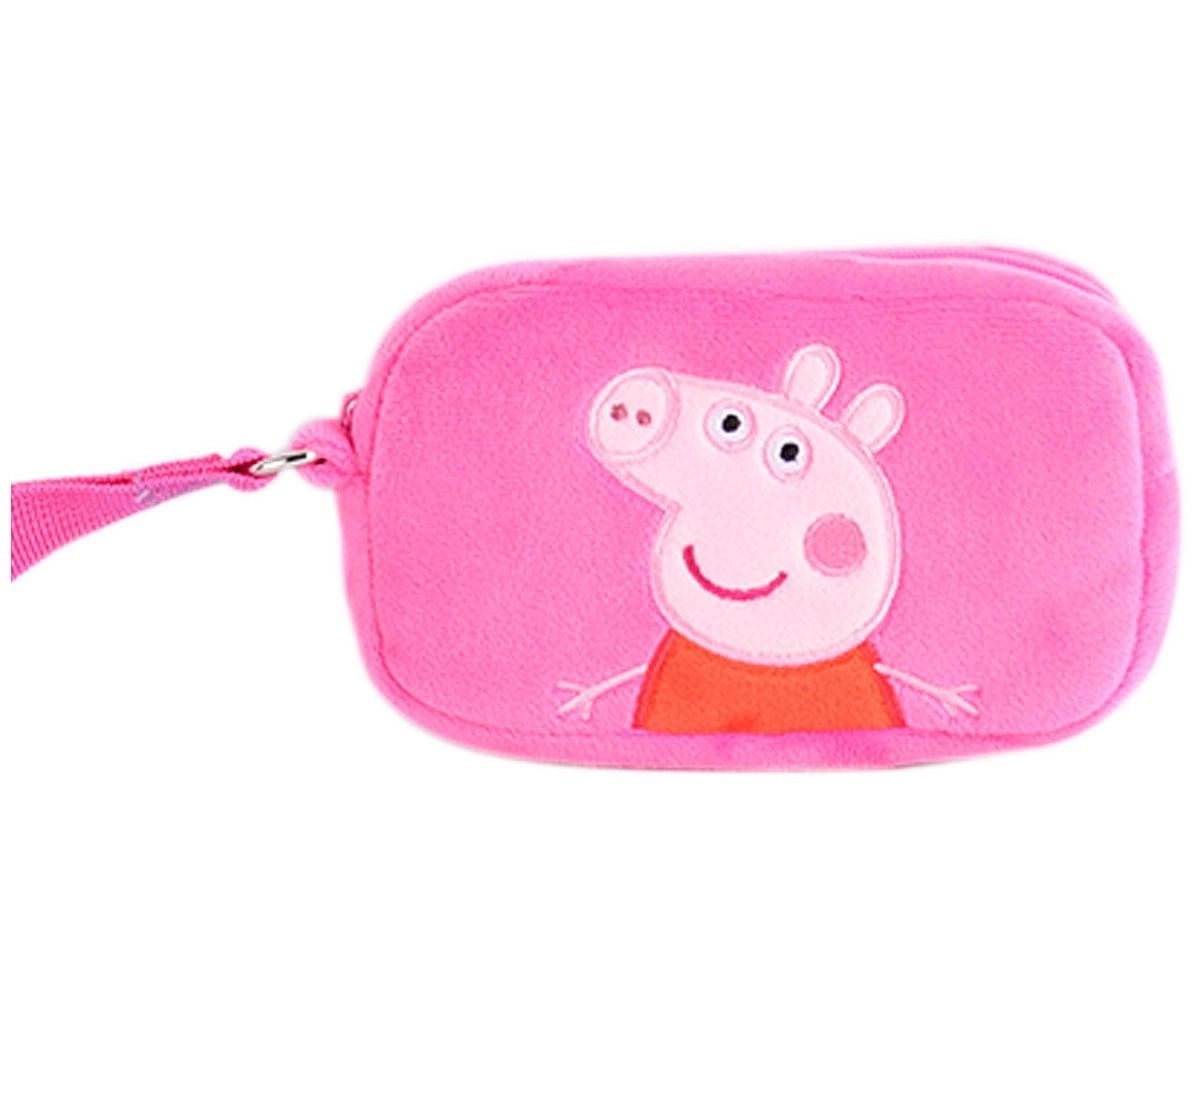 Peppa Pig Pink Plush Toy Wallet, 0M+ (Multicolor)